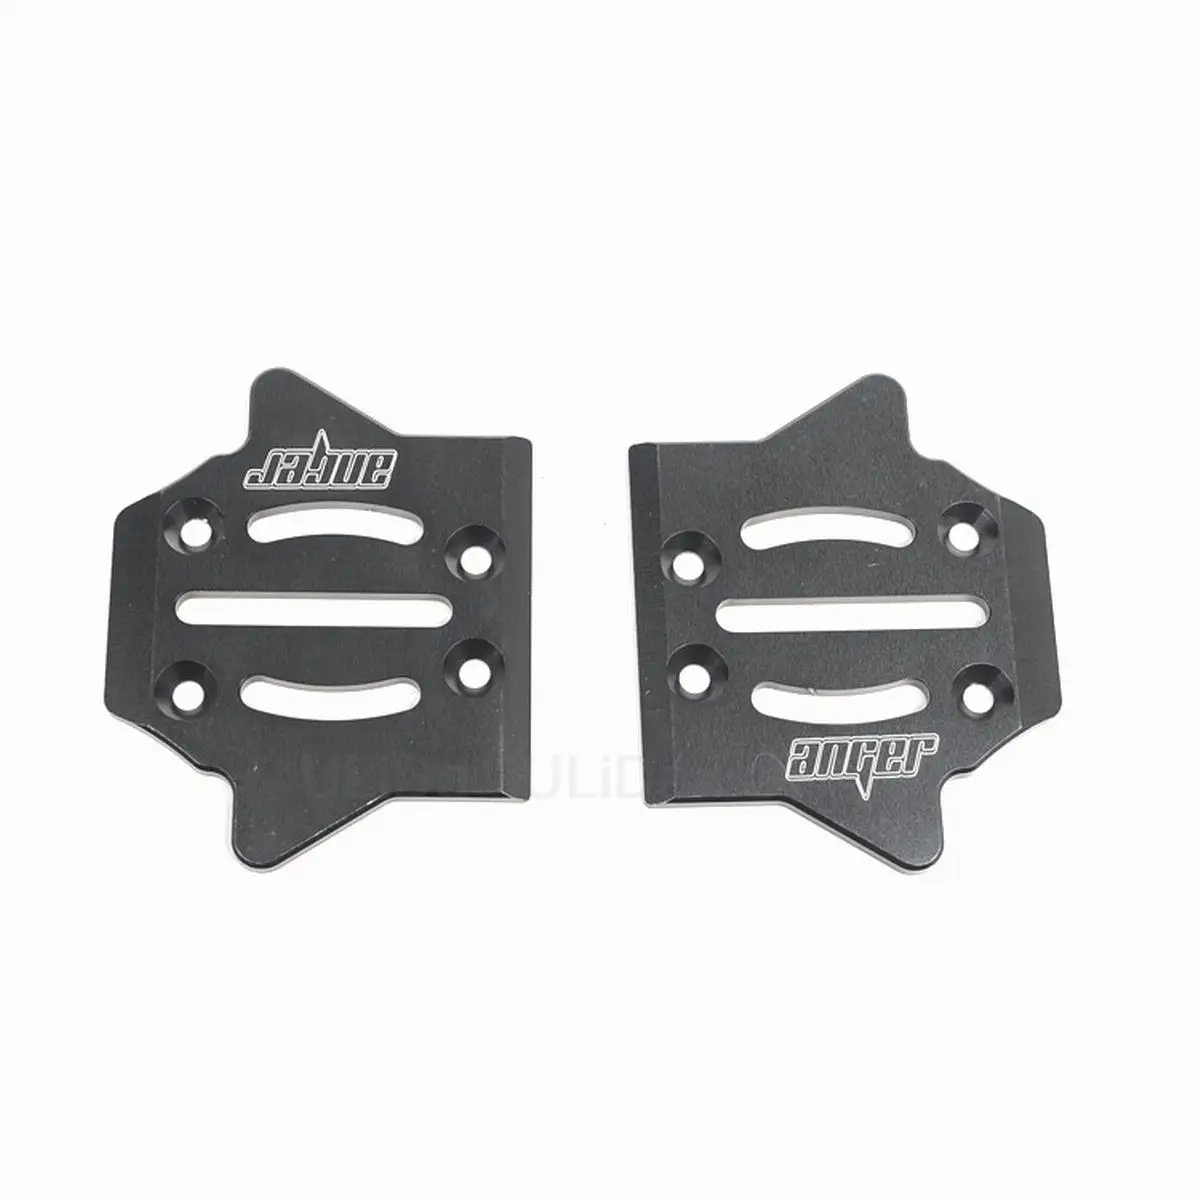 Cnc aluminum chassis protection skid plate platte chassis anti scratch for hobao 8sc h9 thumb200